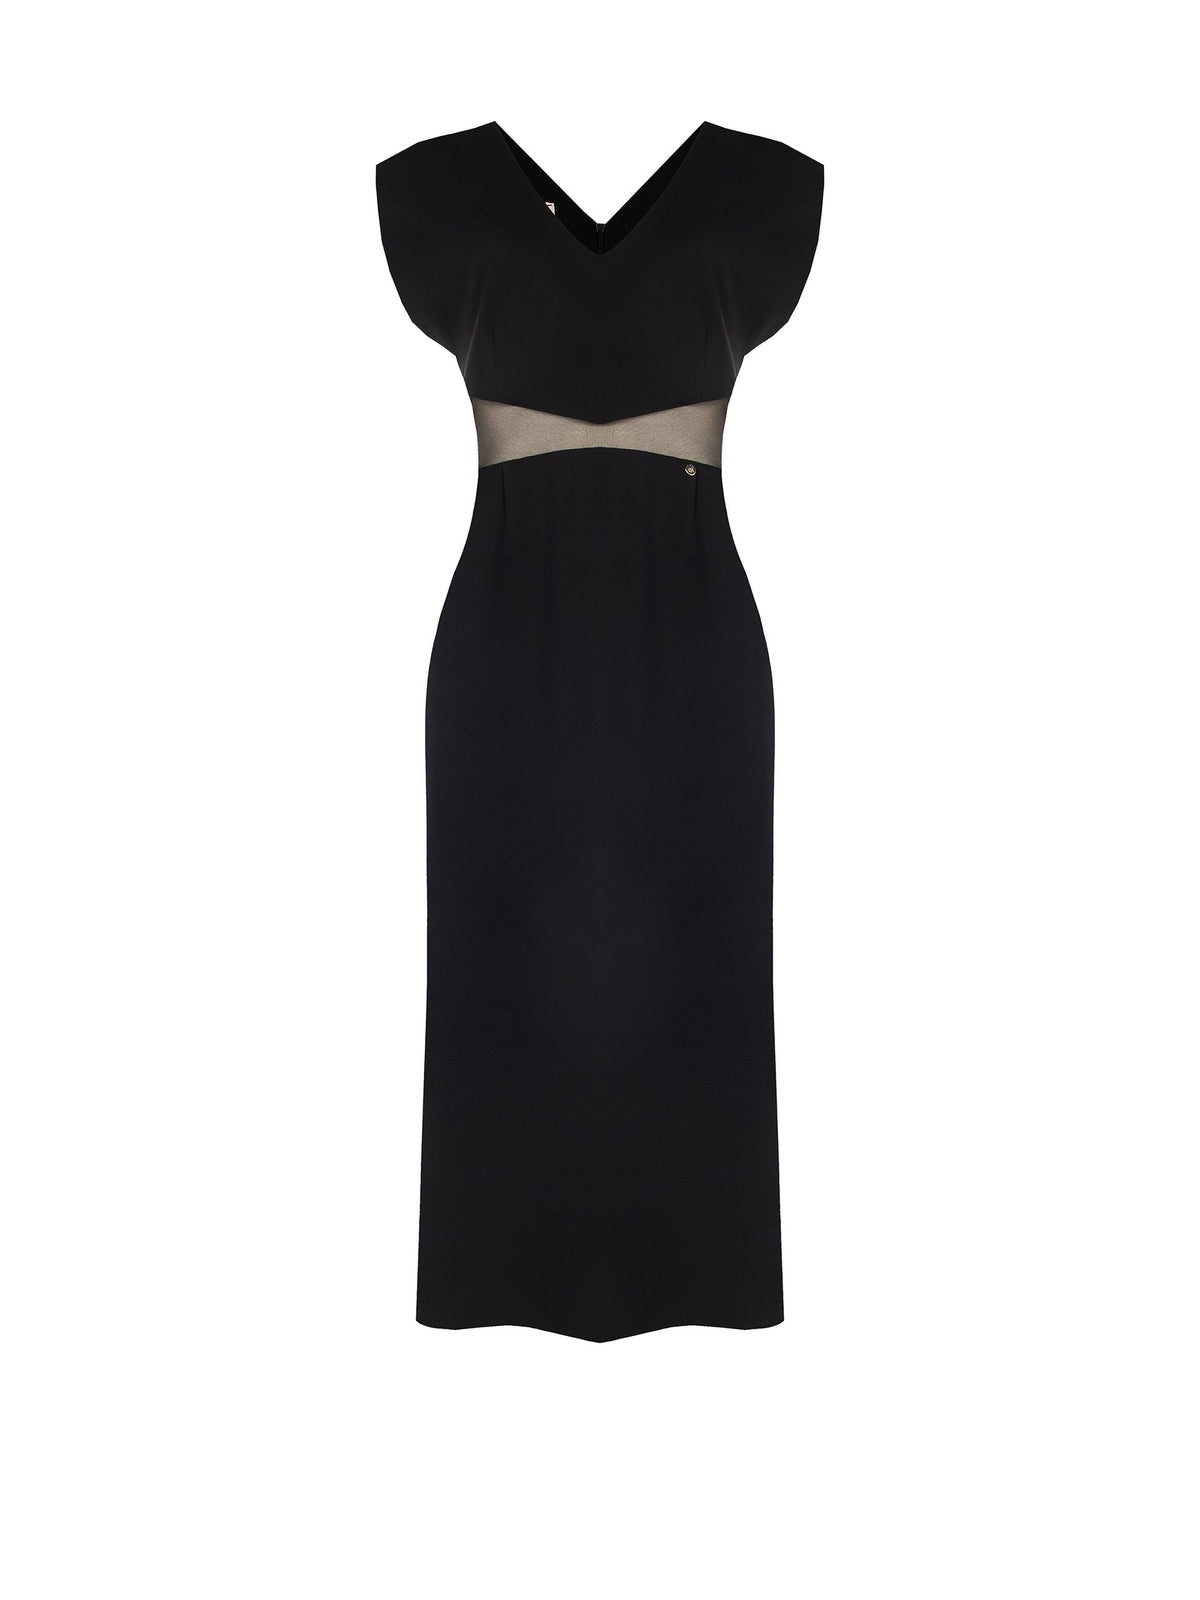 Sheath Dress in Technical Fabric with Shoulder Straps and Mesh Cut-Out